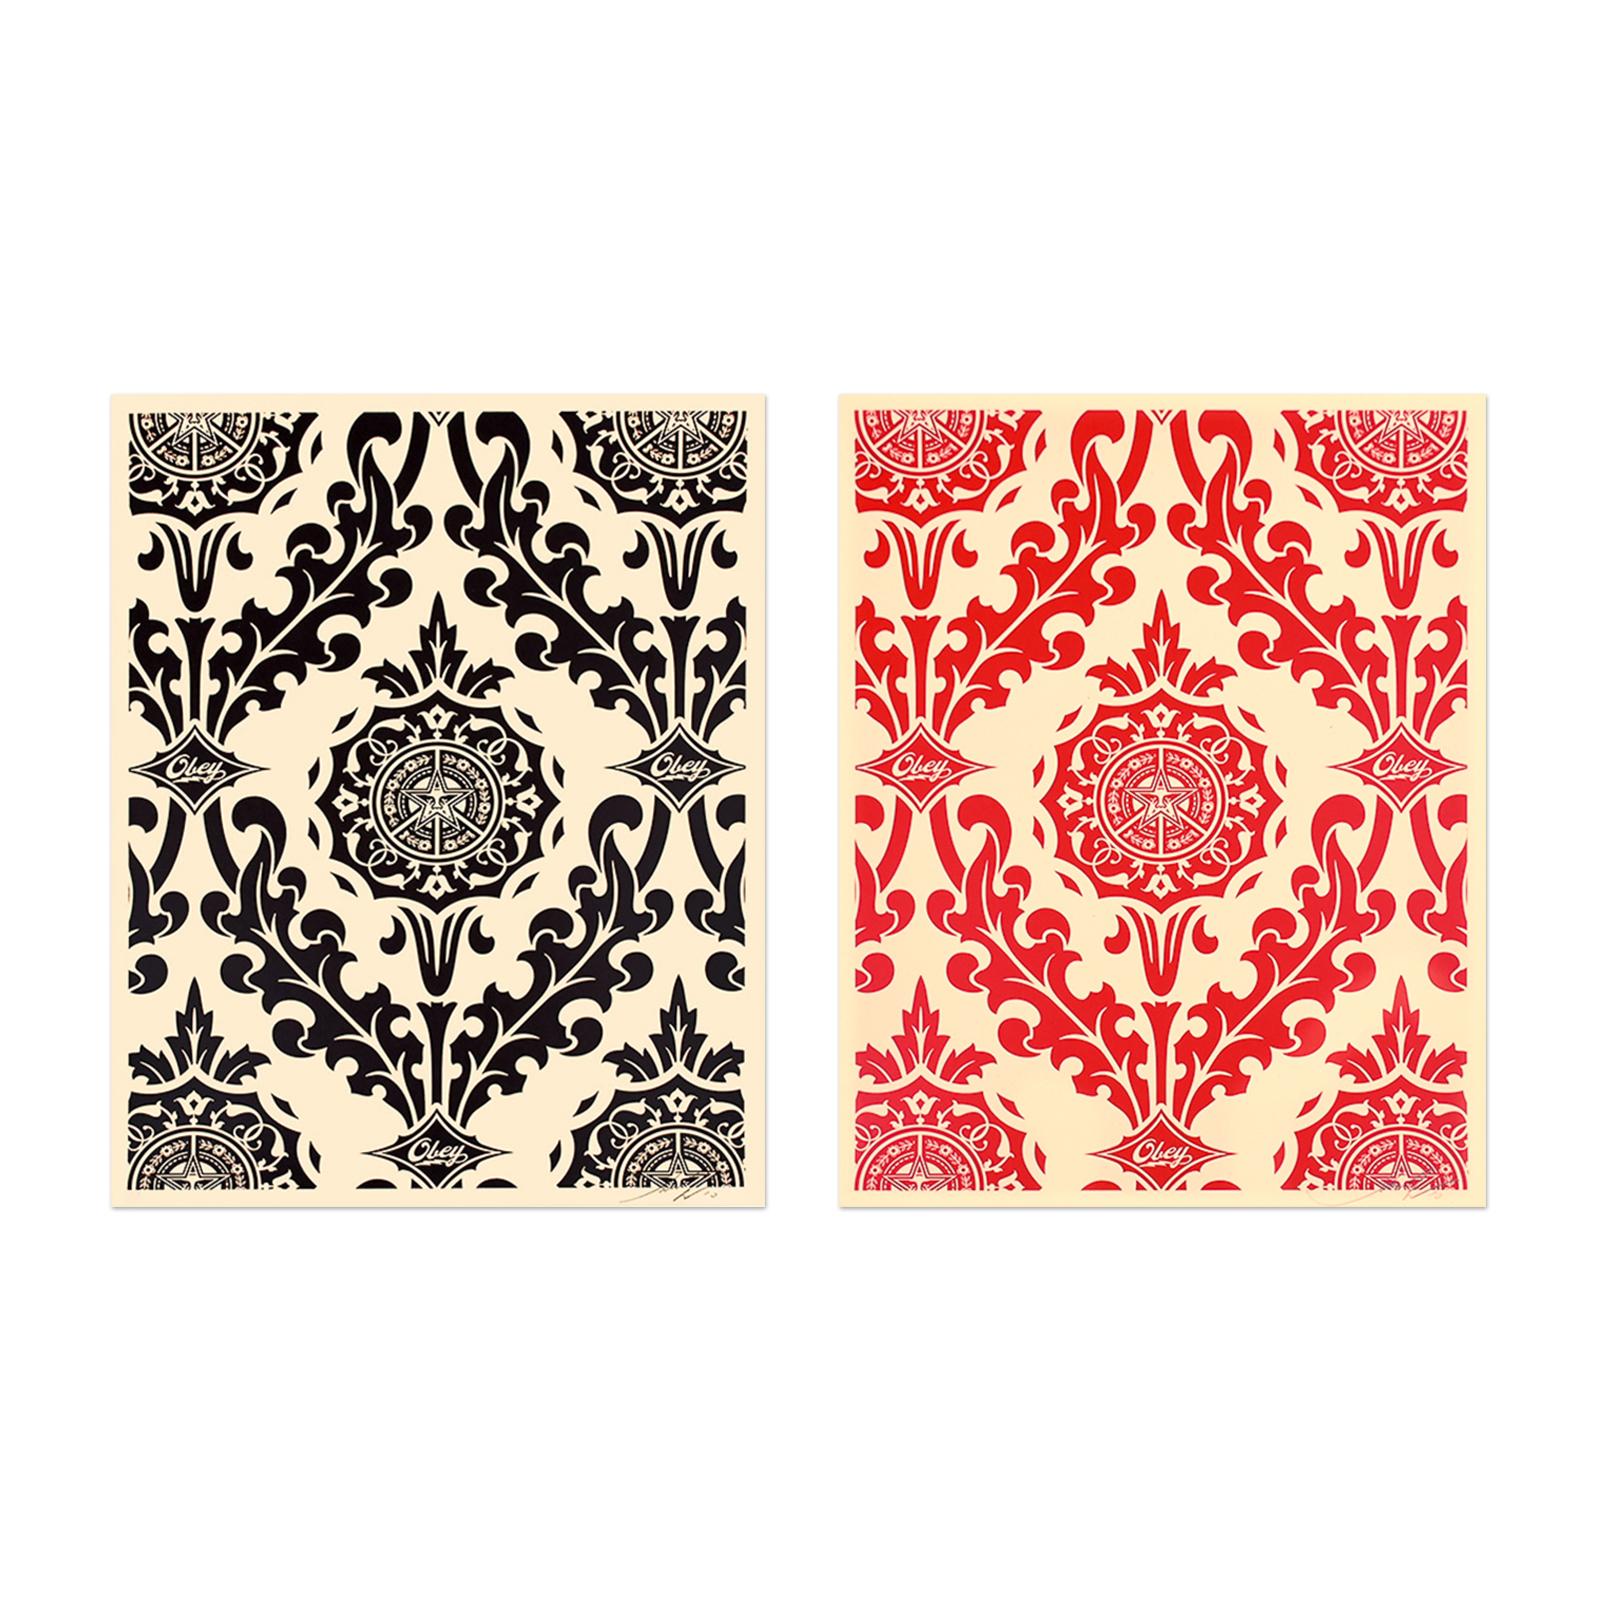 Shepard Fairey (American, b. 1970)
Parlor Pattern, 2010
Medium: Set of 2 screenprints on paper
Dimensions: each 61 × 45.7 cm (24 × 18 in)
Edition of 85: each hand-signed and numbered
Publisher: Obey Giant
Condition: Excellent